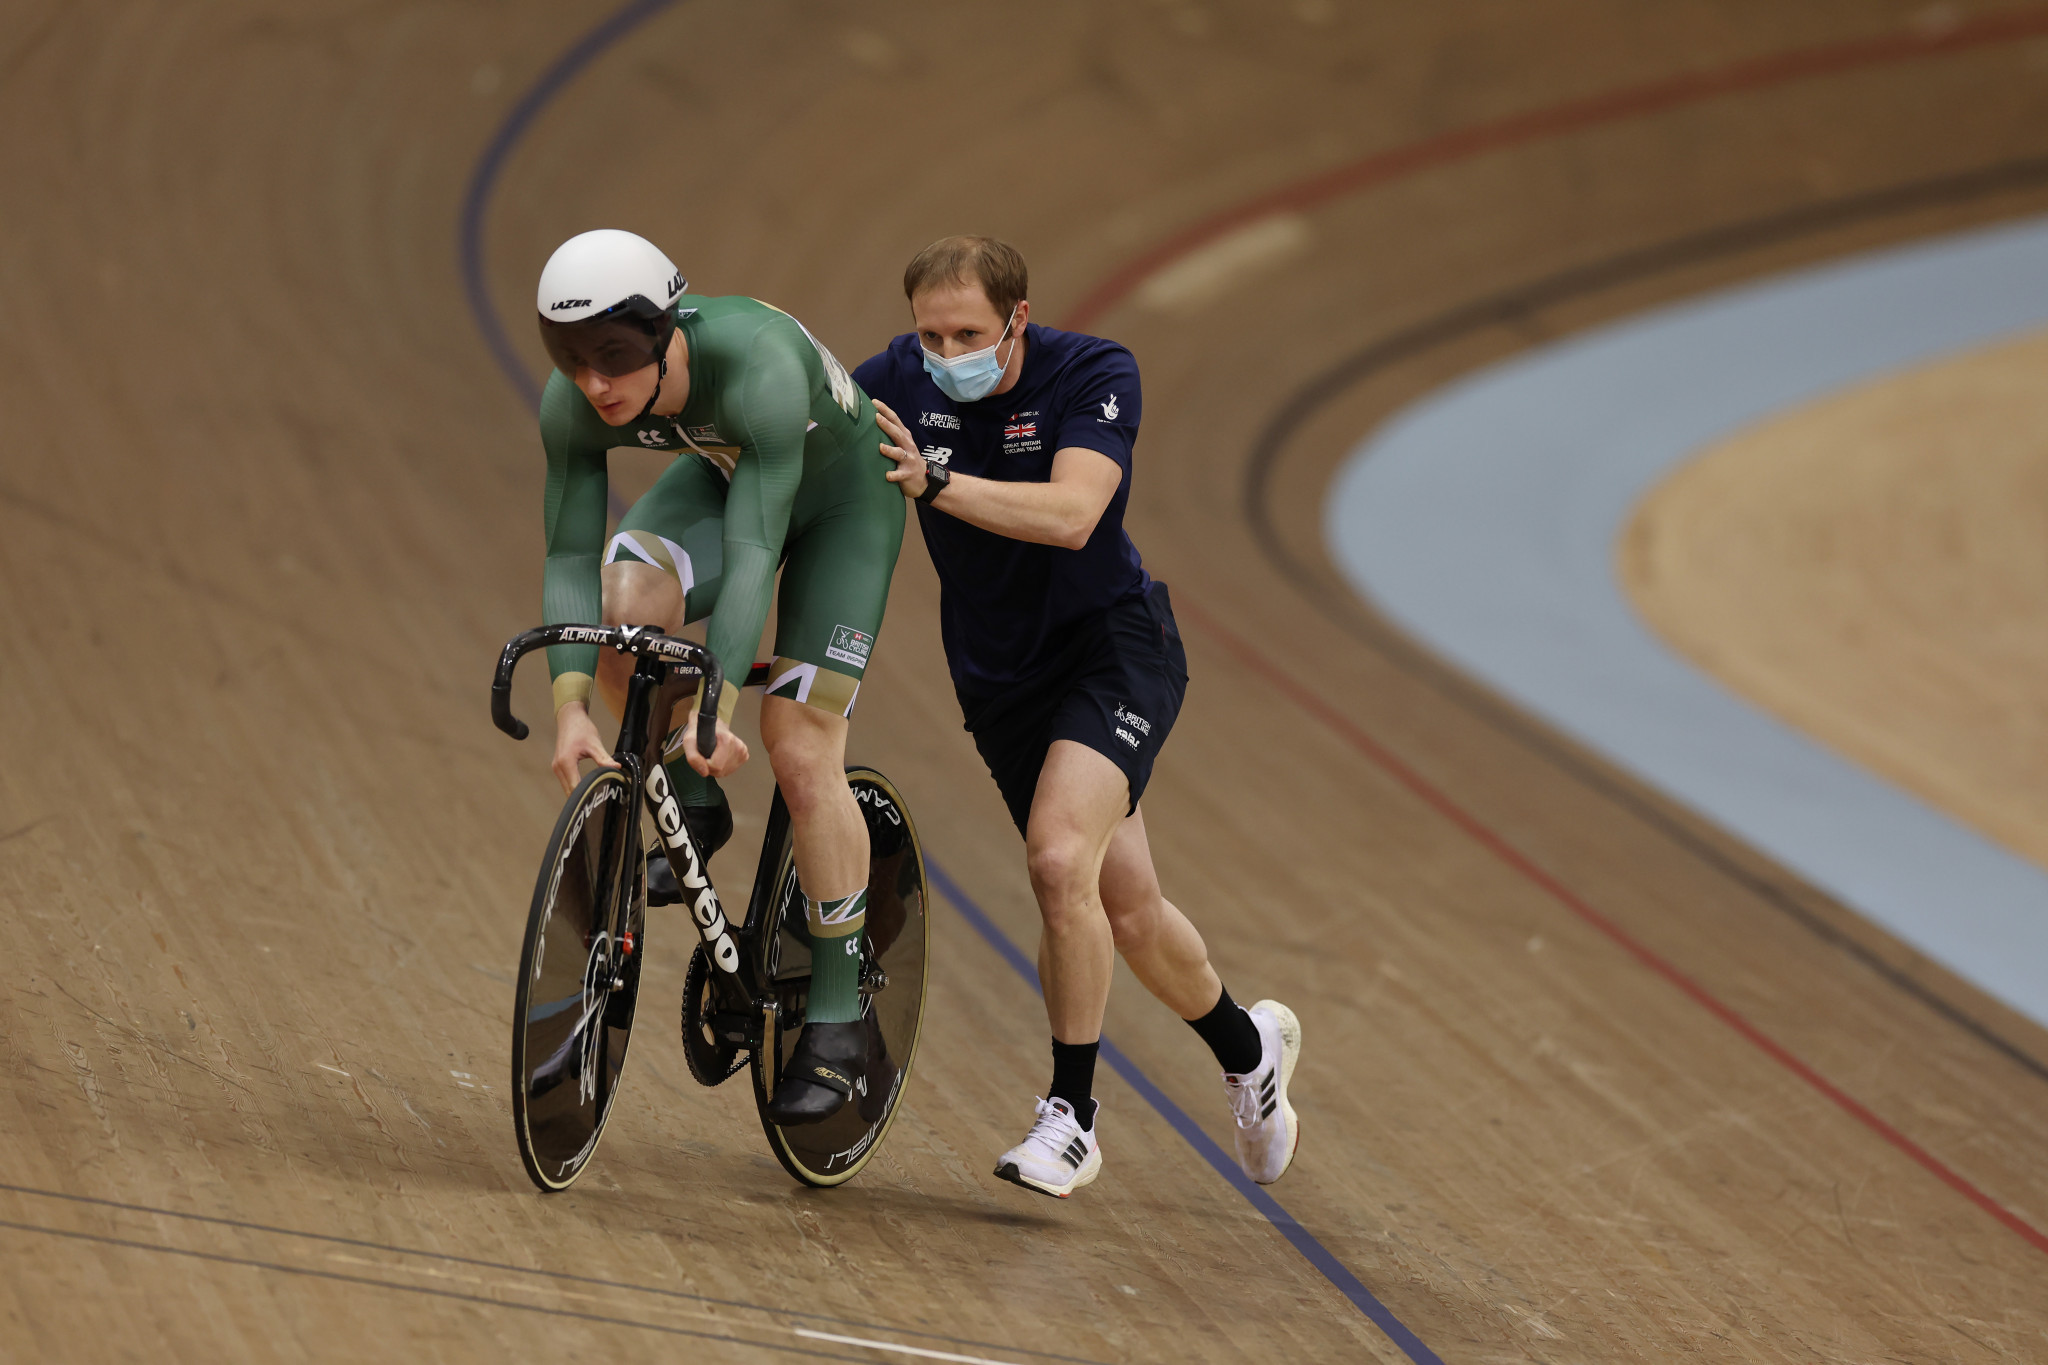 Sir Jason Kenny is coaching Britain's men's sprint cyclists in the build-up to Paris 2024 ©Getty Images